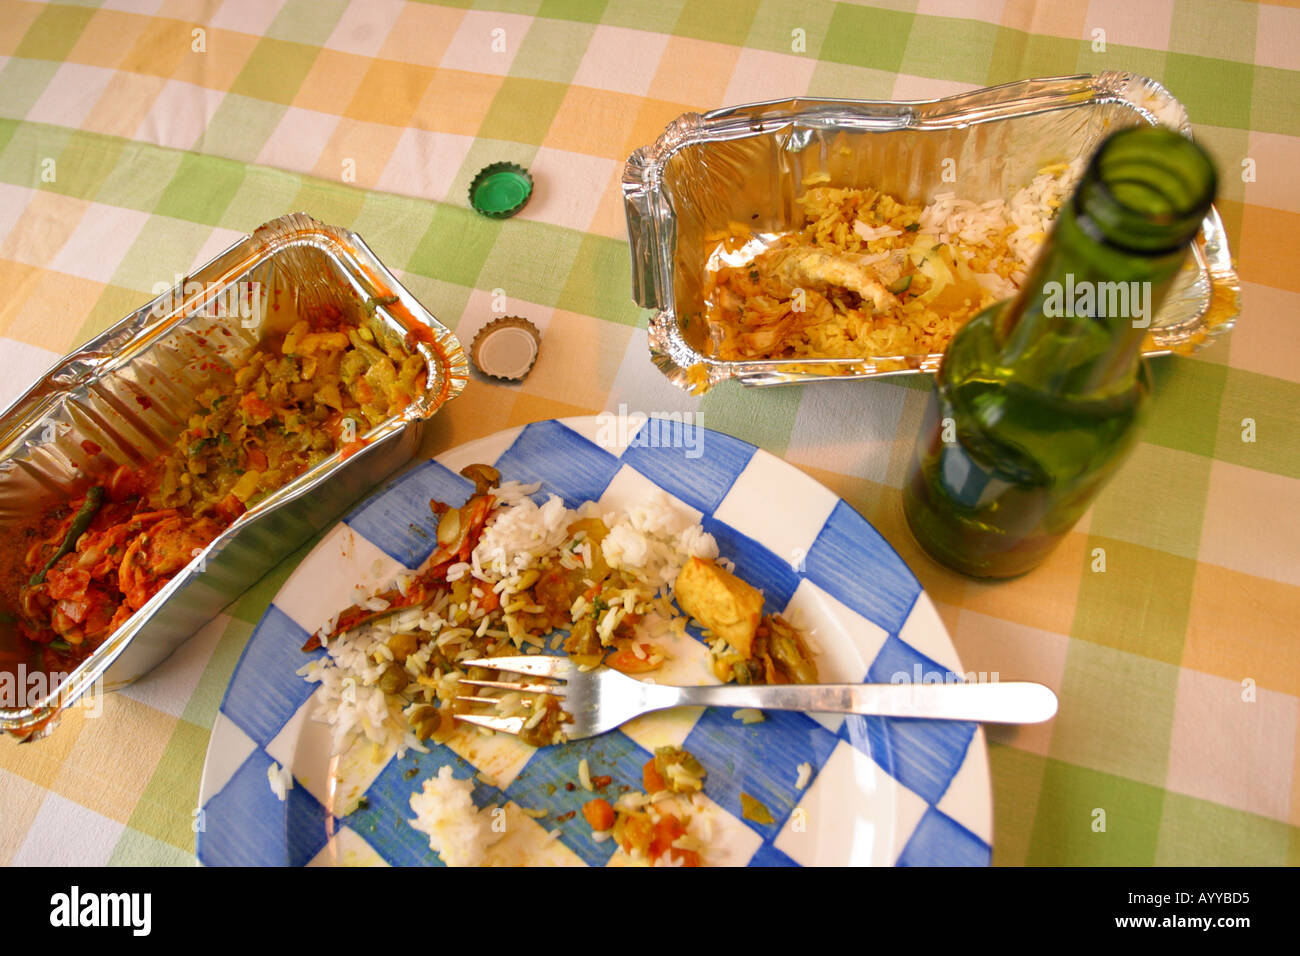 Takeaway Indian food carton and beer meal Stock Photo